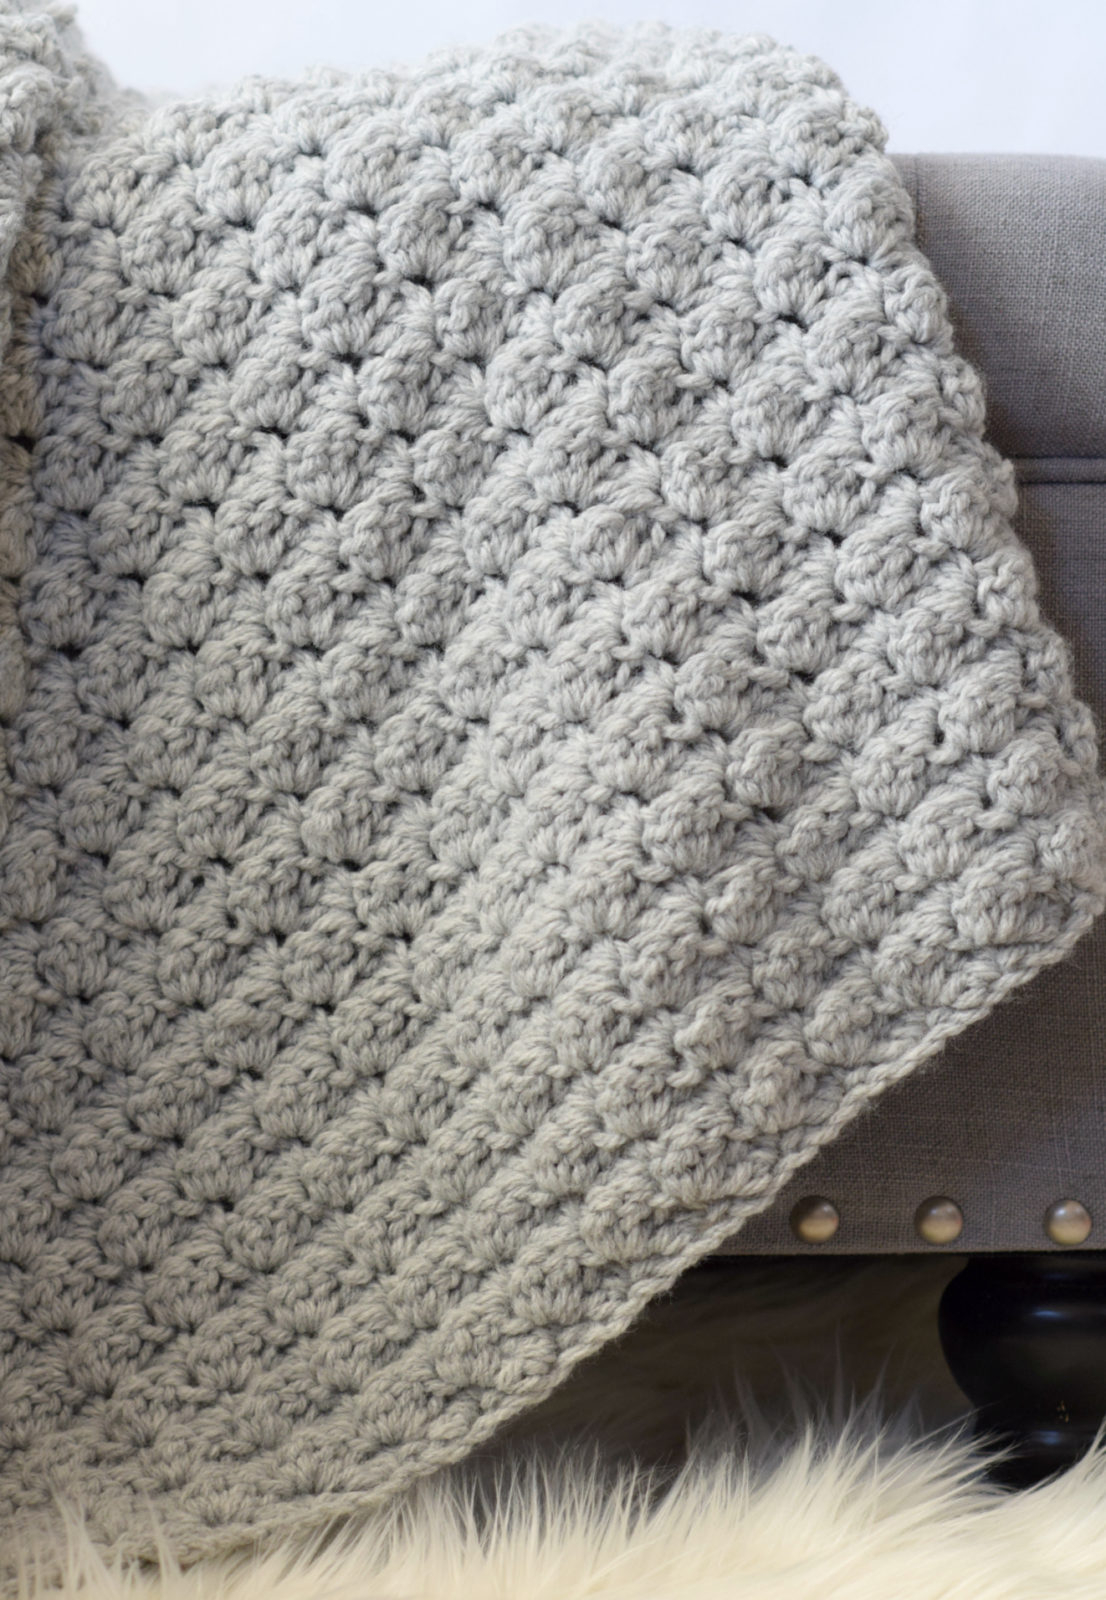 Crochet Blanket Pattern For Beginners Simple Crocheted Blanket Go To Pattern Mama In A Stitch